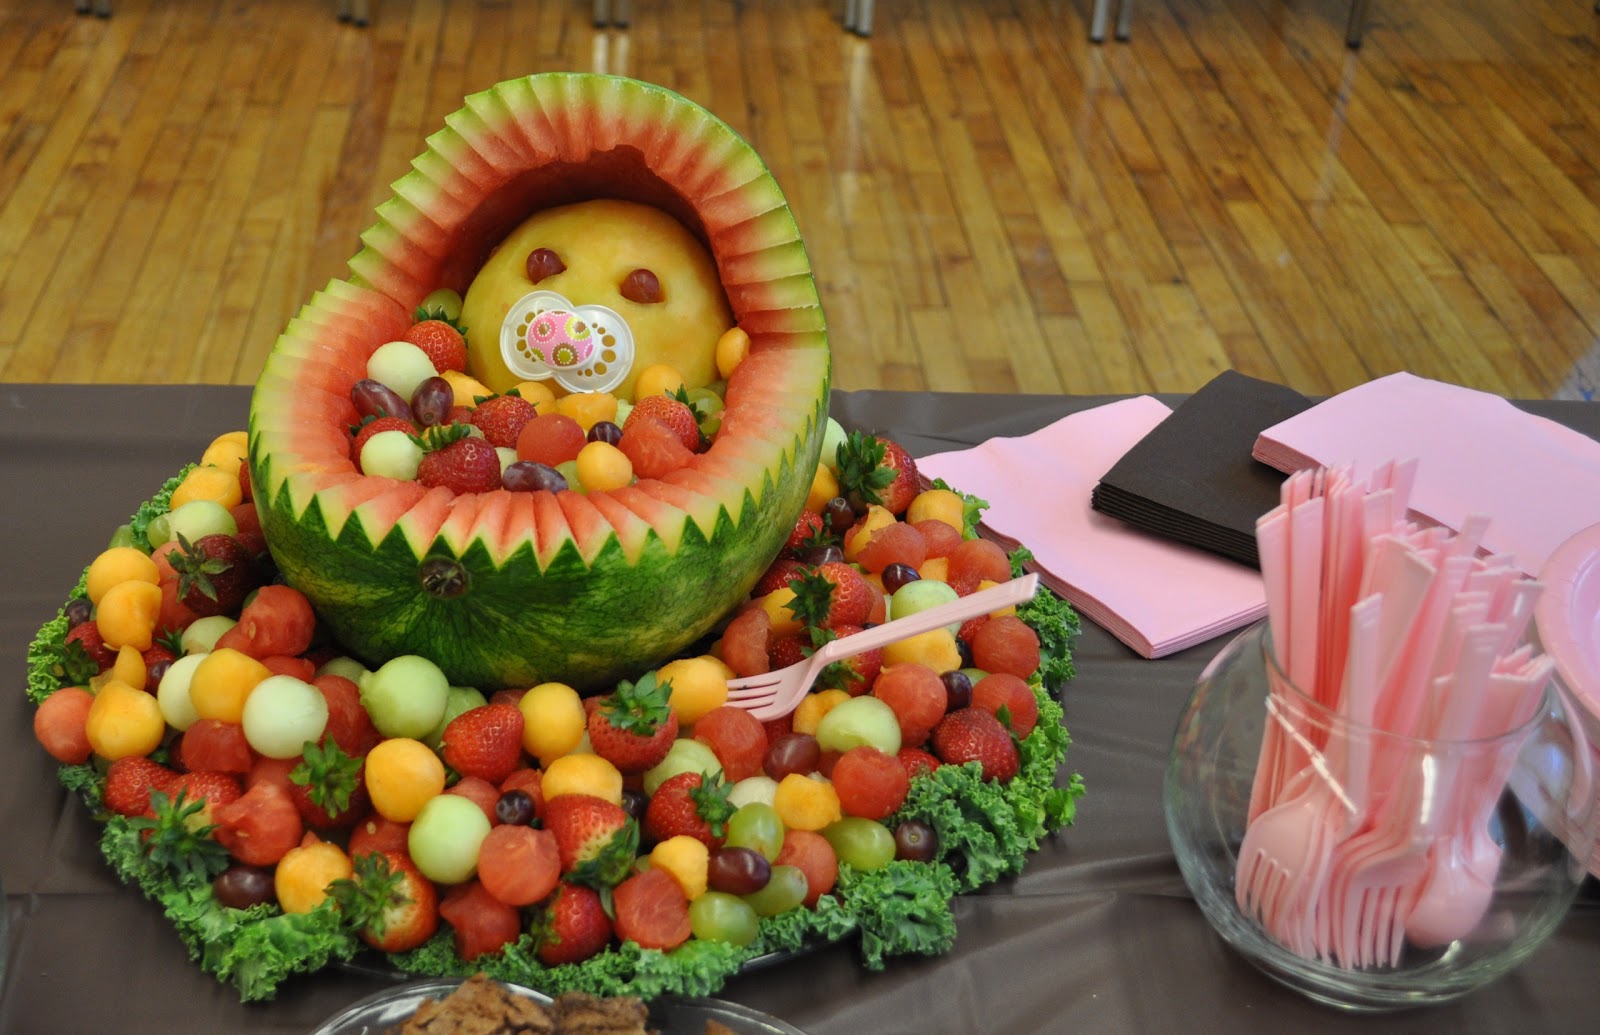 Yep, there is a 'baby' in that watermelon!